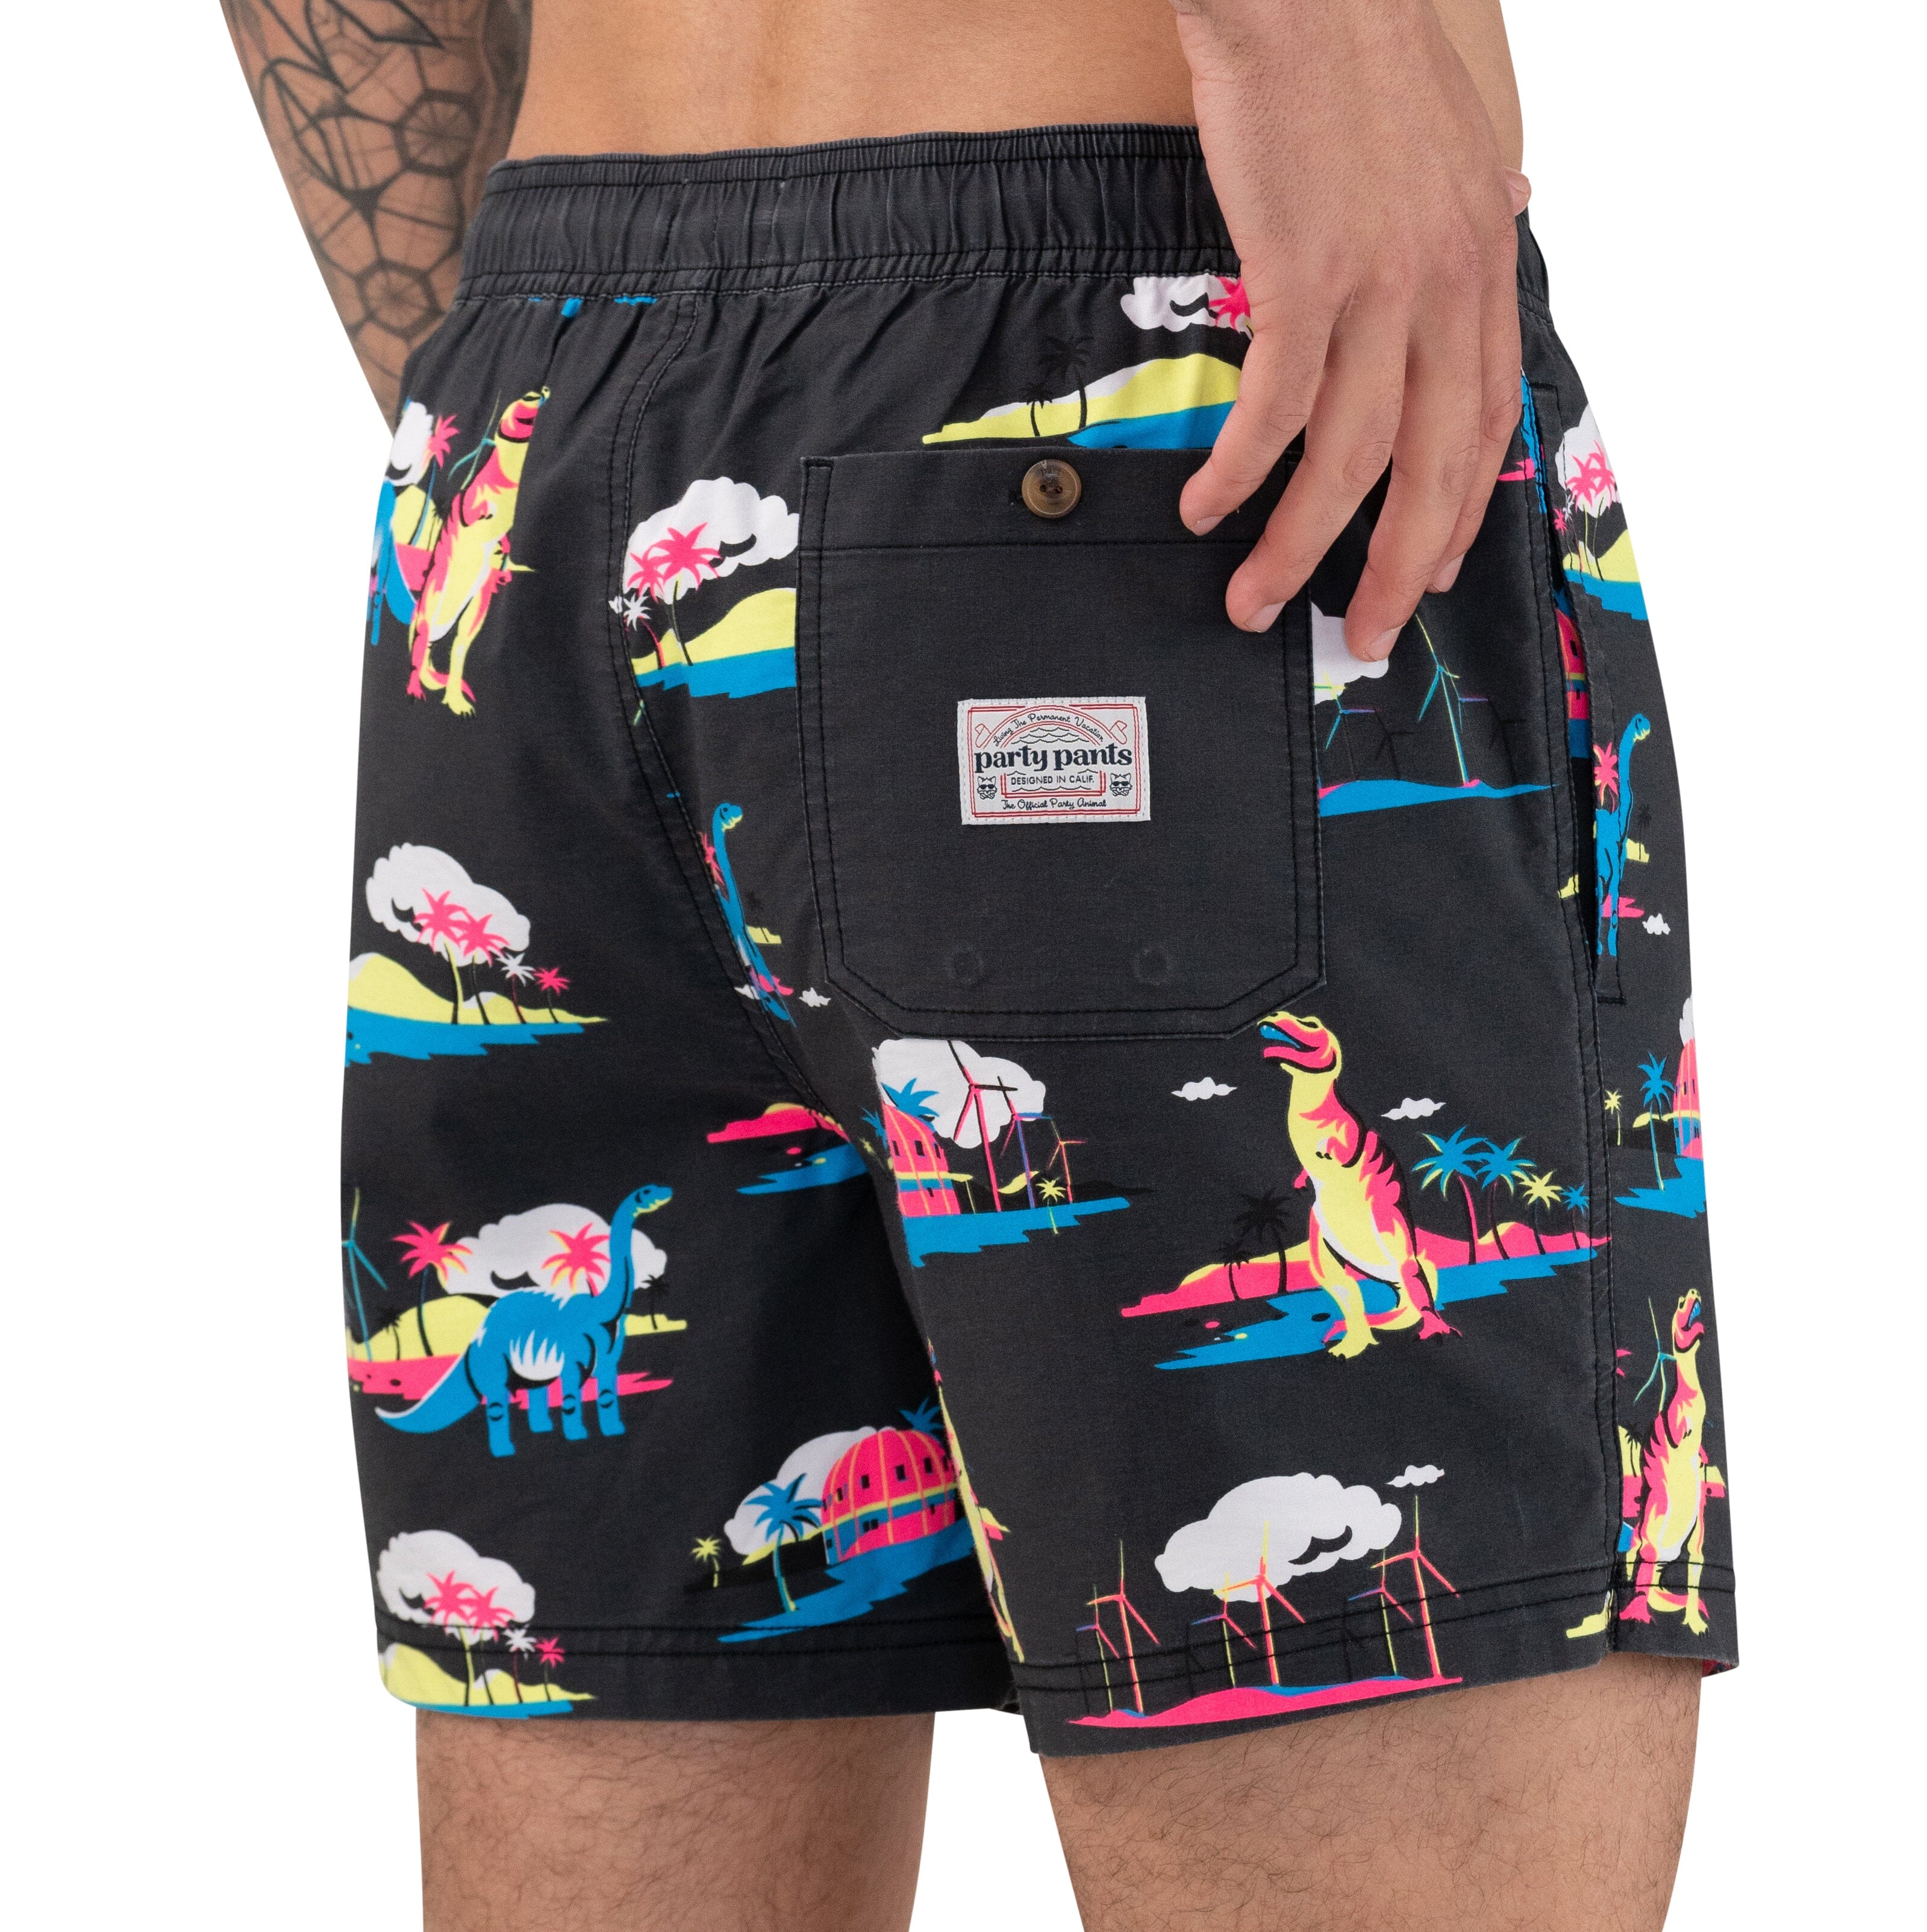 PALM SPRINGS PARTY STARTER SHORT - BLACK PRINTED SHORTS PARTY PANTS 